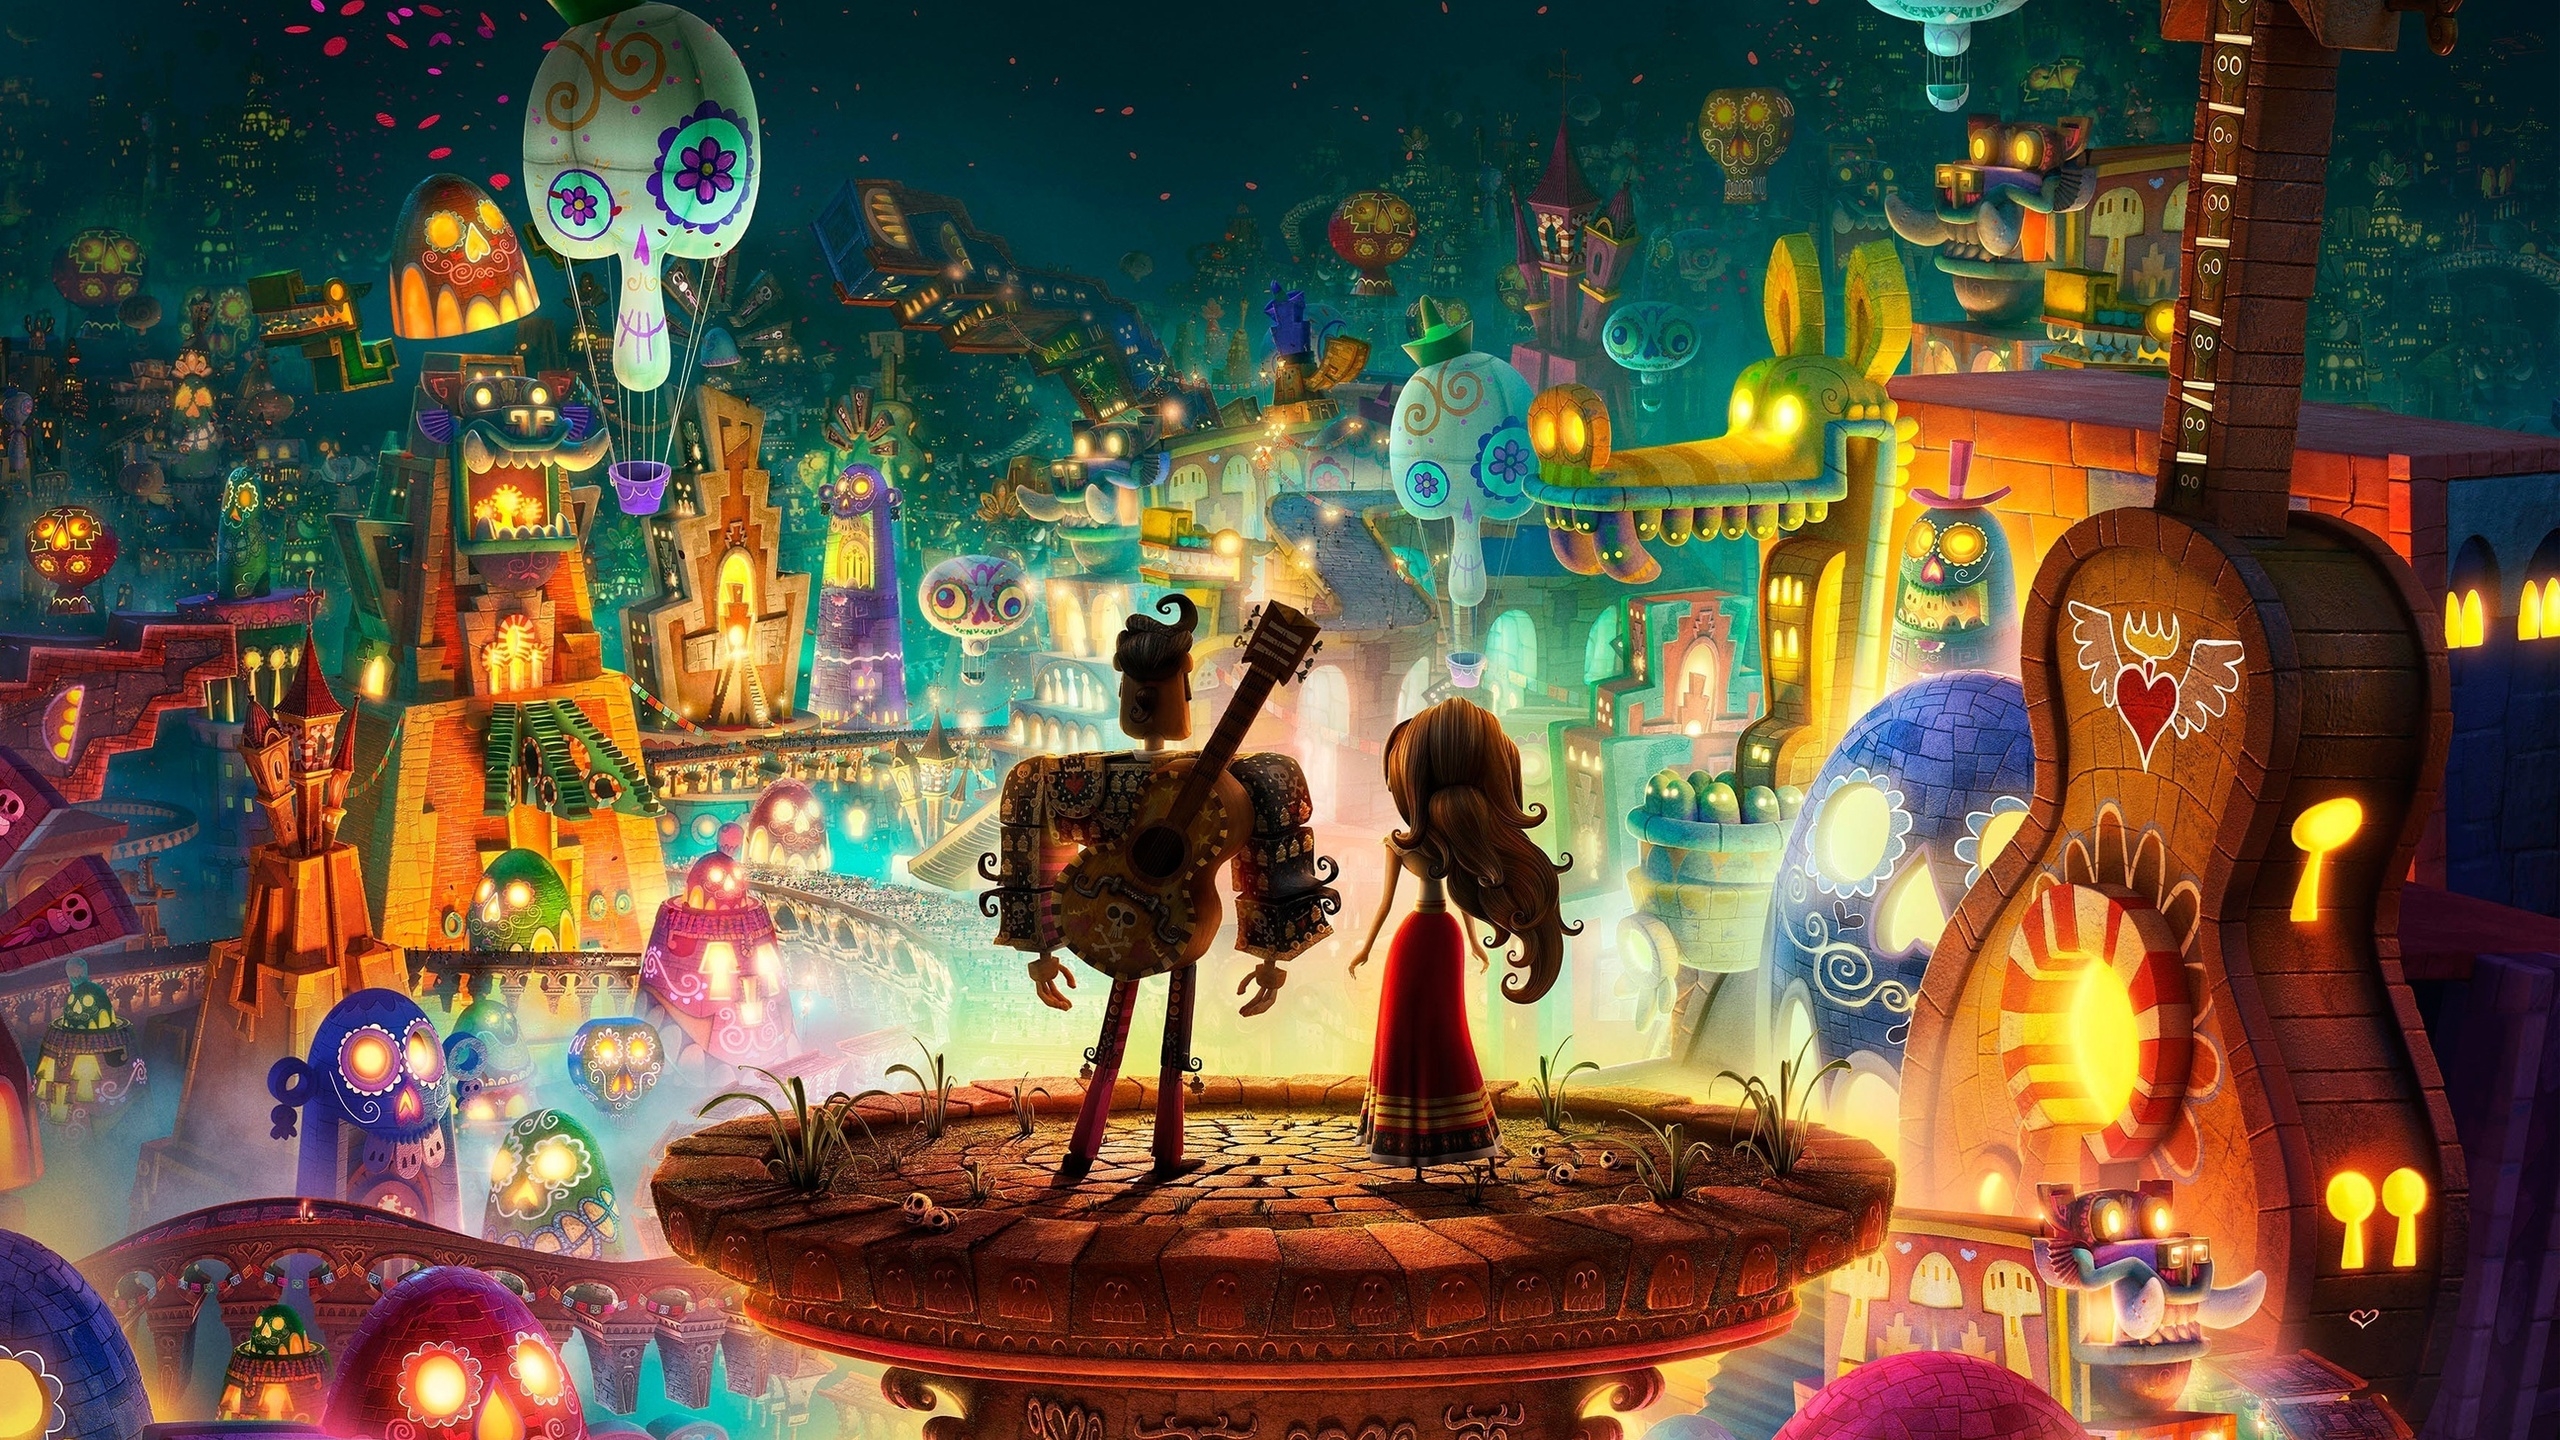 The Book of Life Film for 2560x1440 HDTV resolution